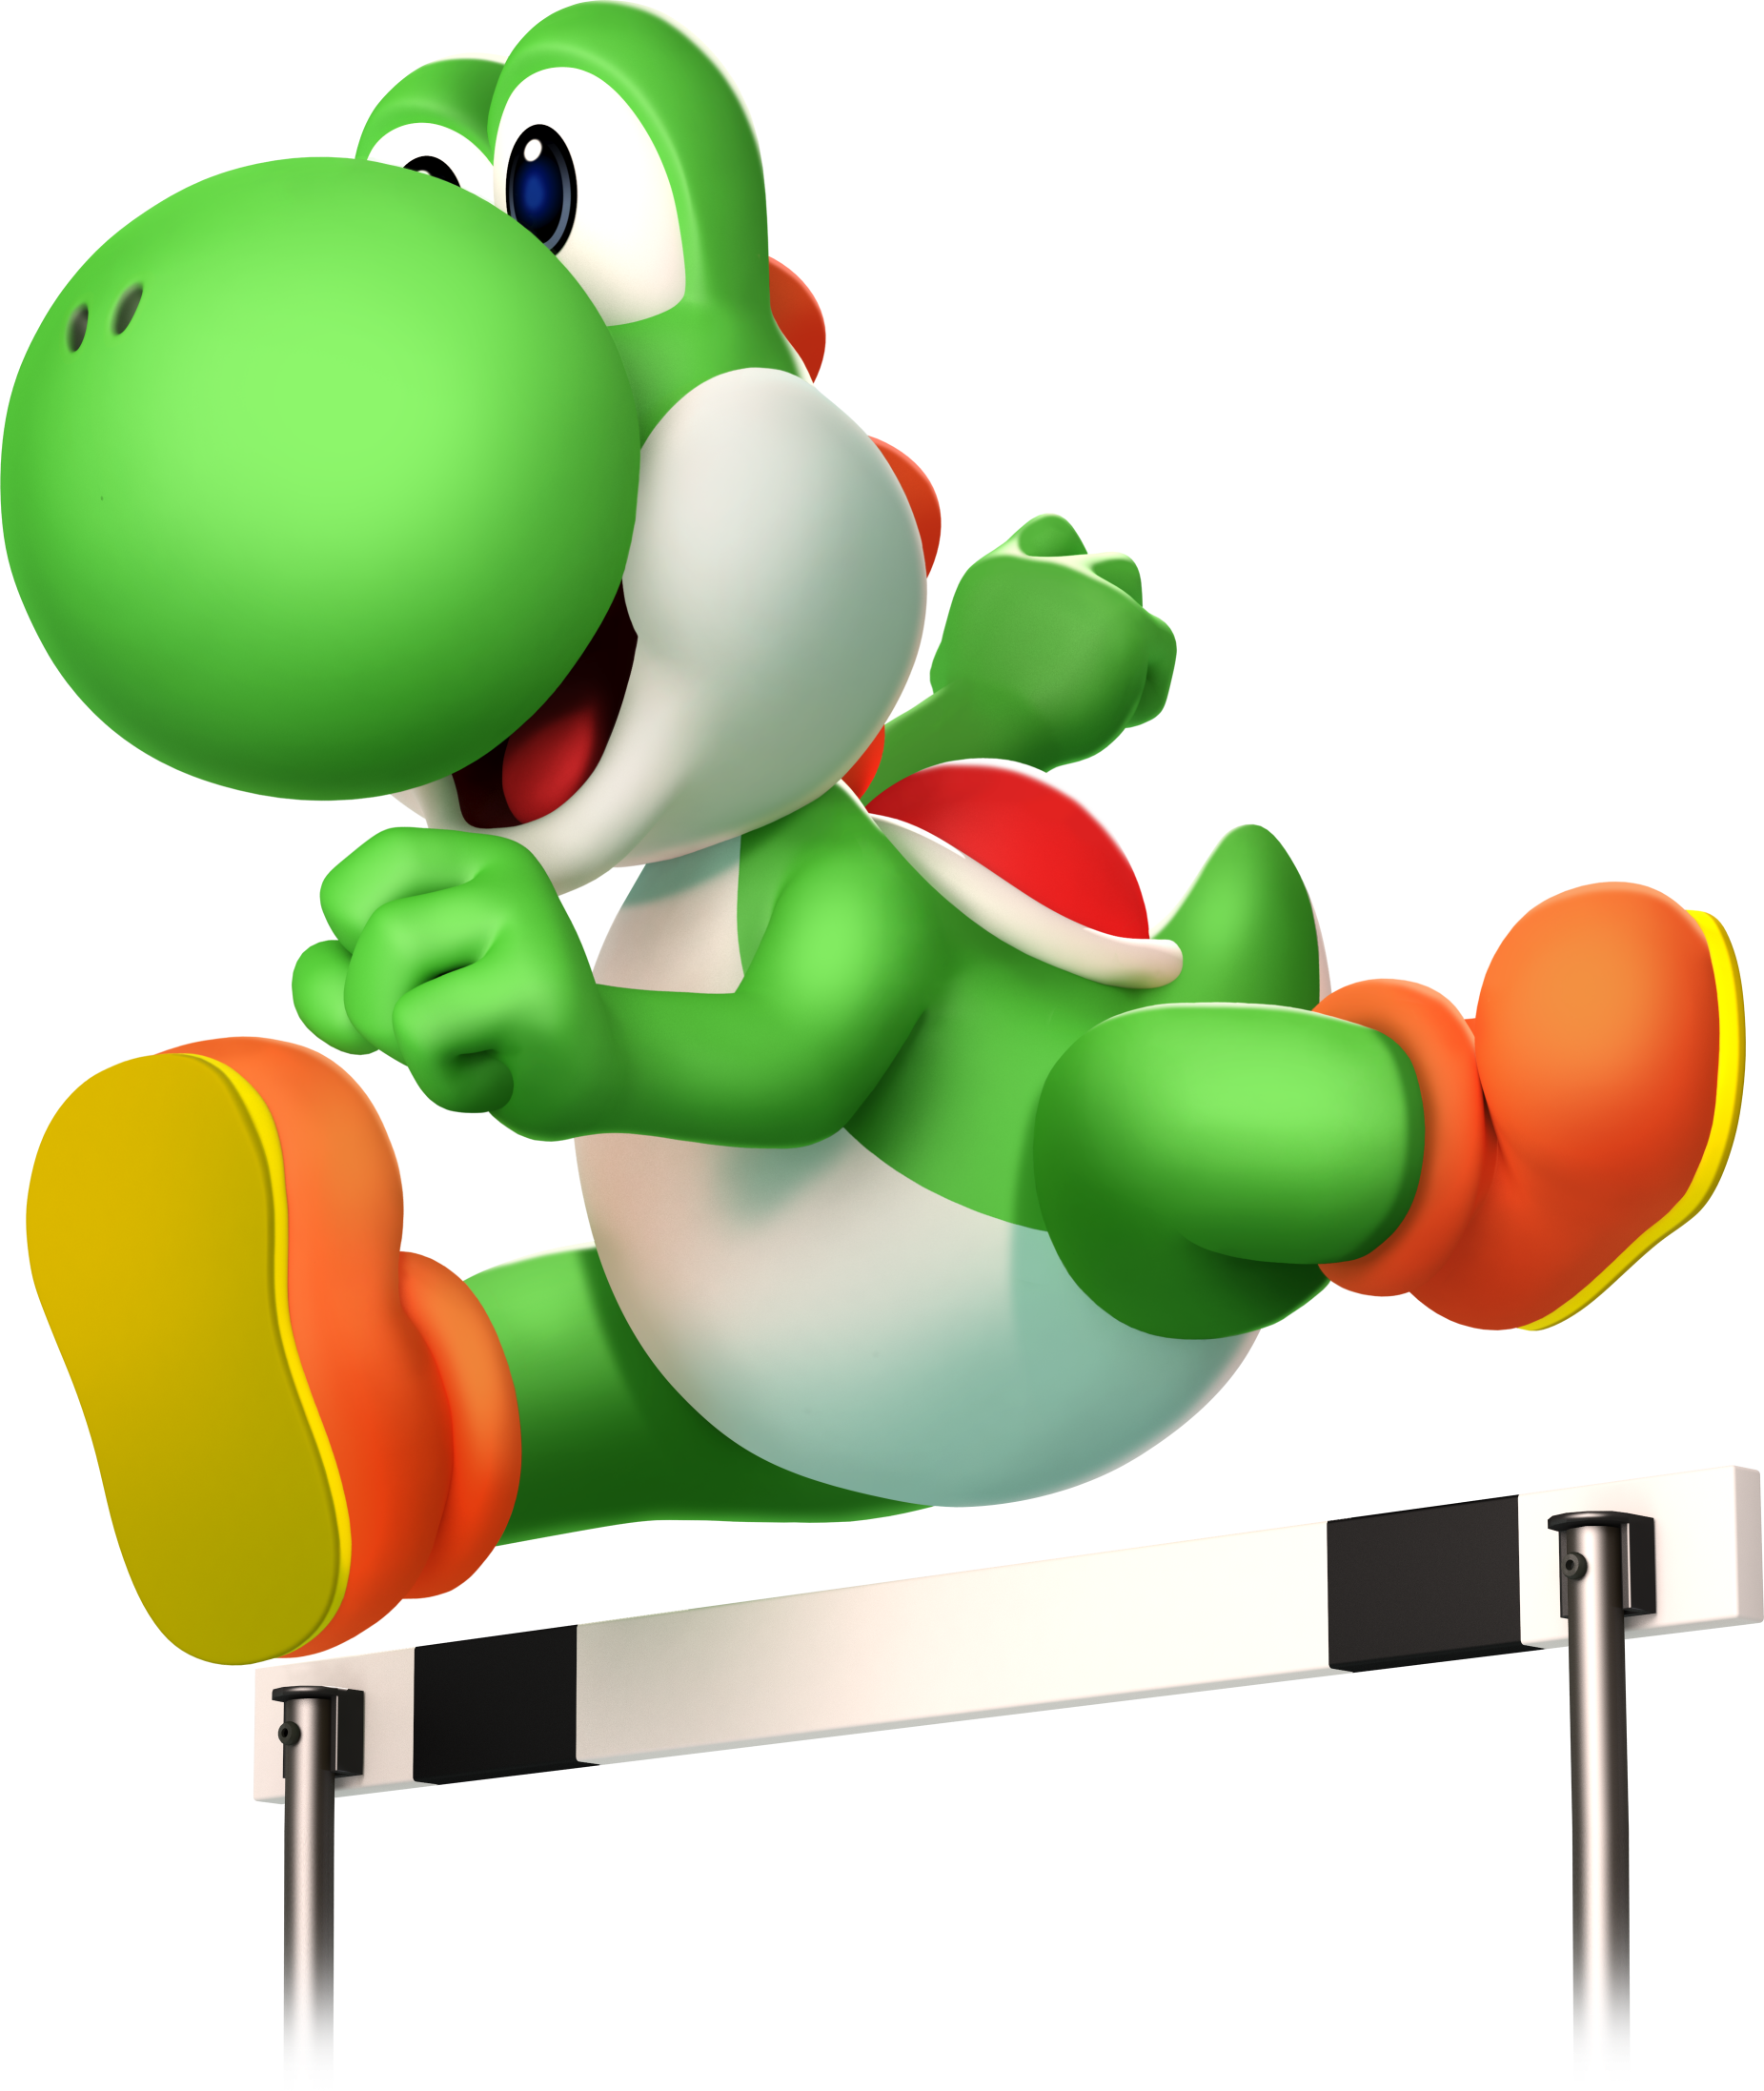 Yoshi PNG Image with Transparent Background